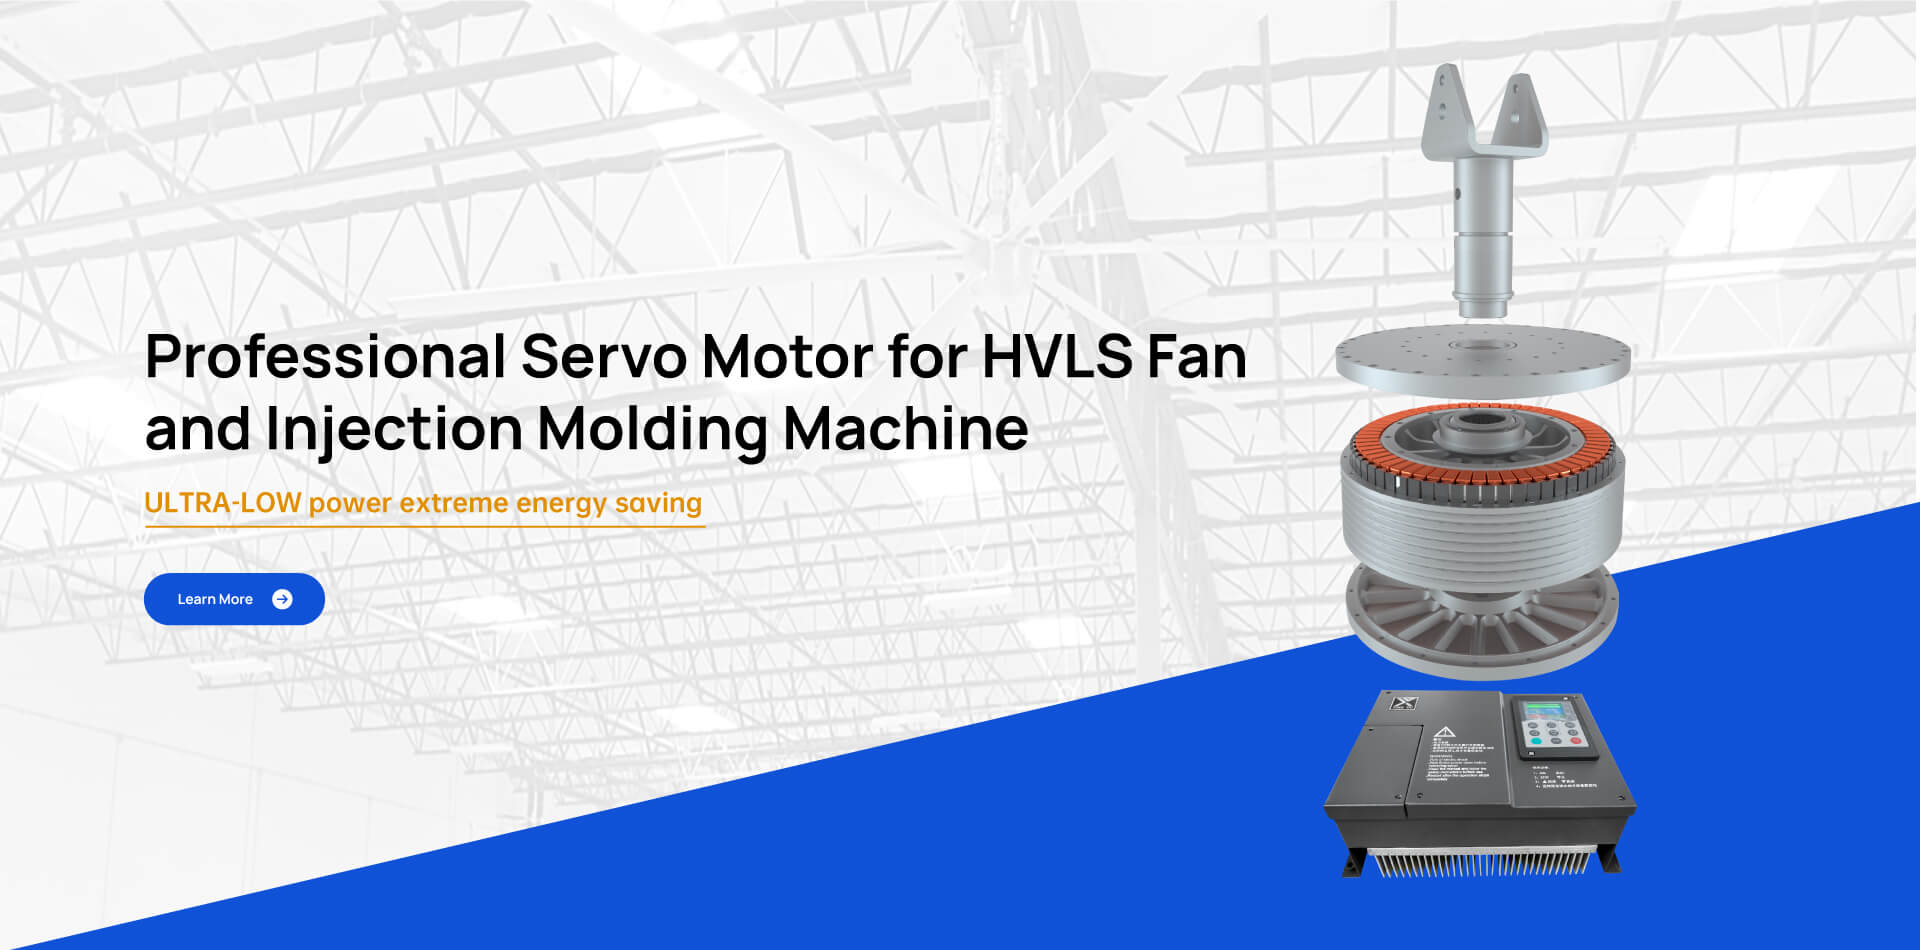 Professional Servo Motor for HVLS Fan and Injection Molding Machine